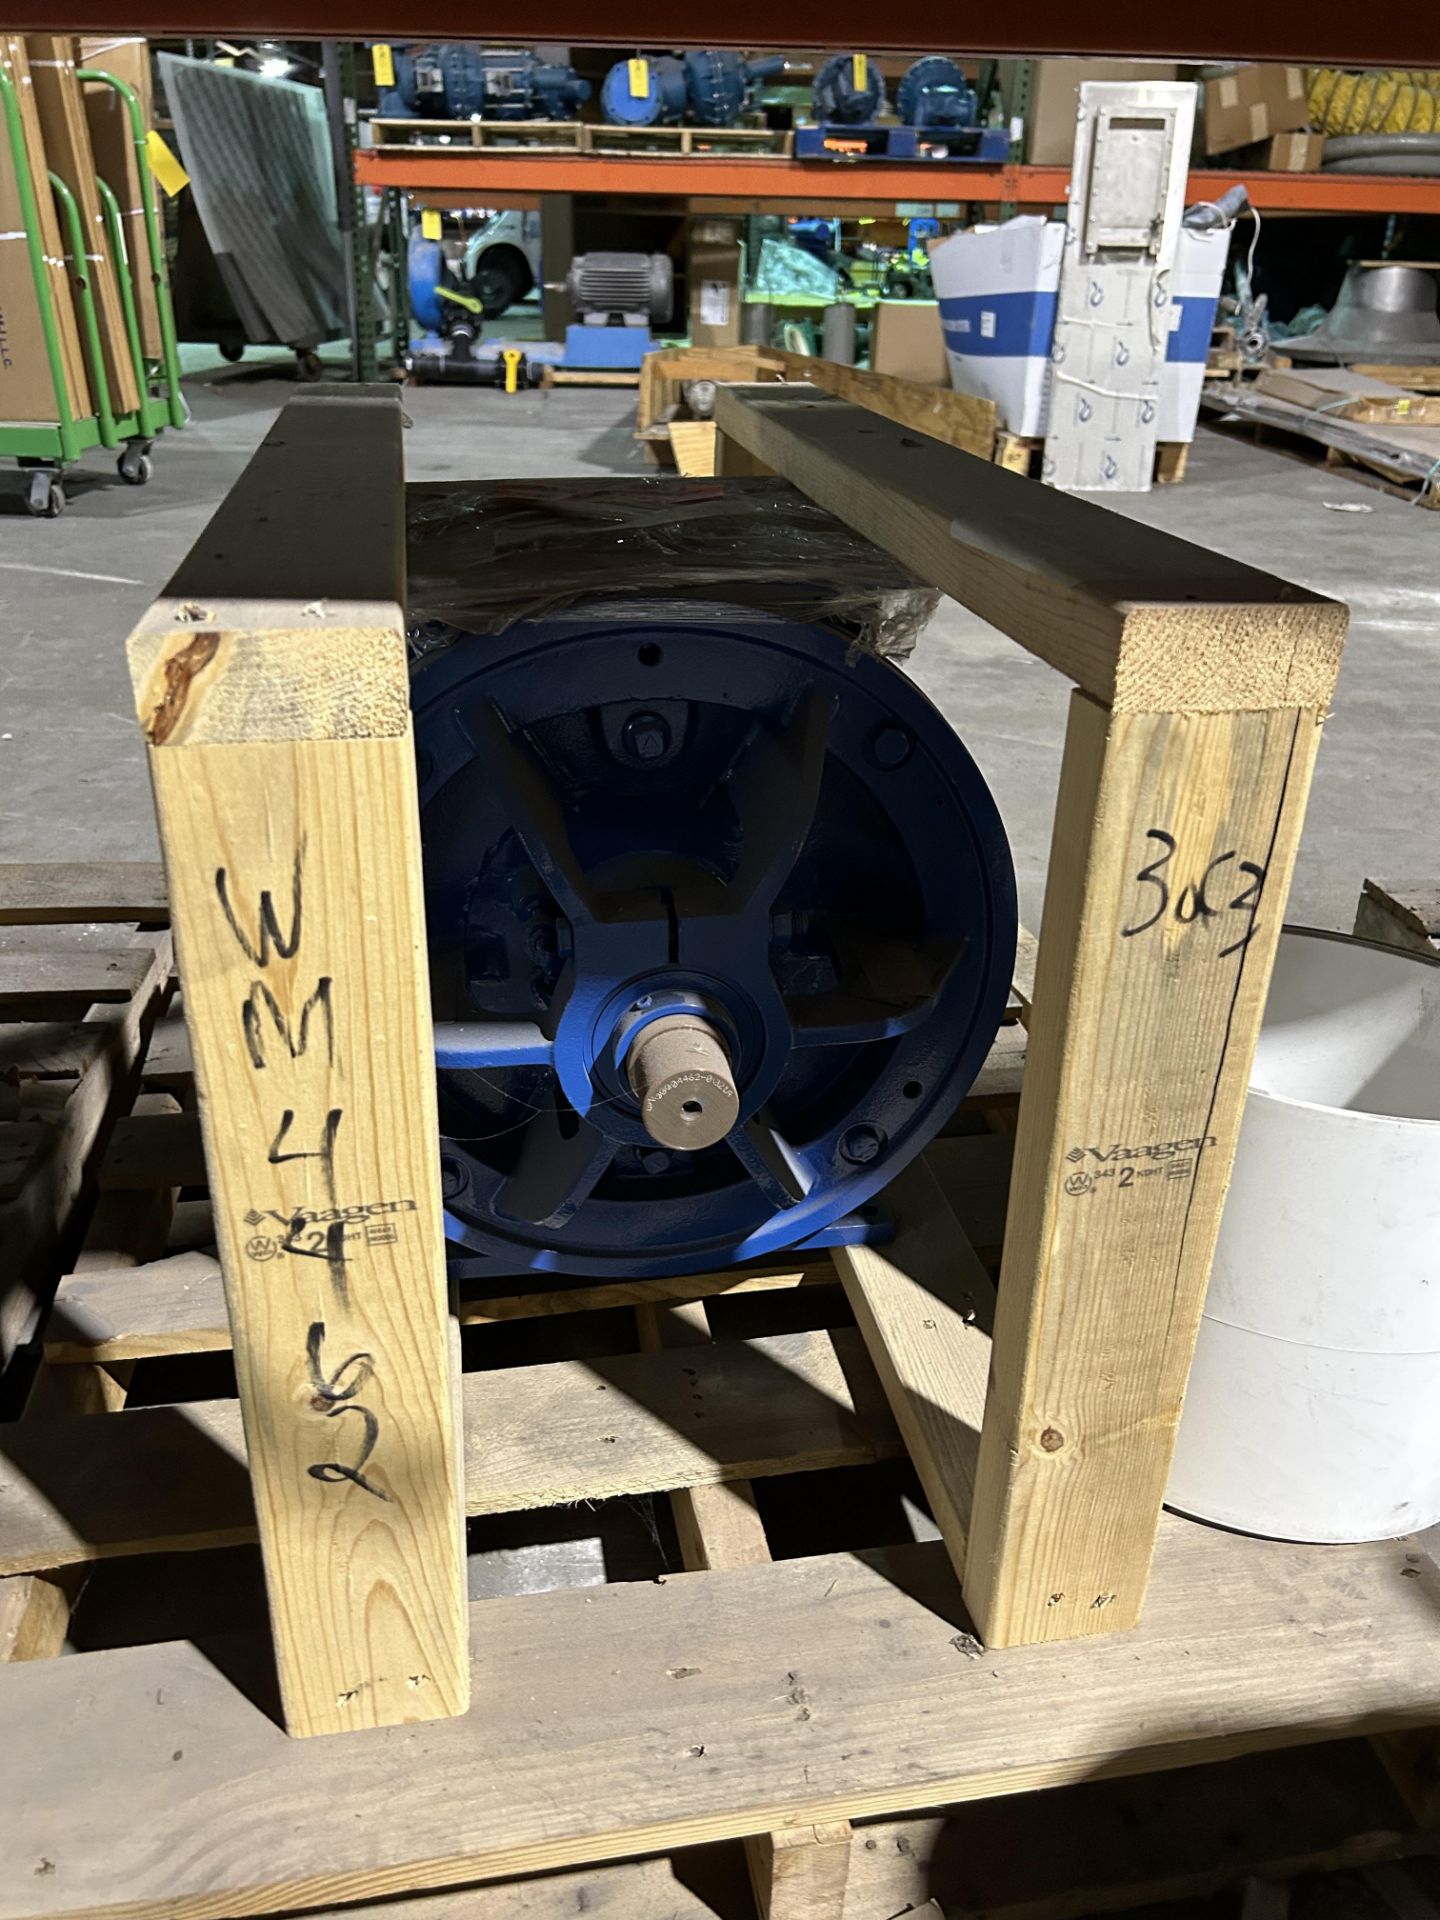 Andritz Rotary Valve , Rigging & Loading Fee: $100 - Image 5 of 7